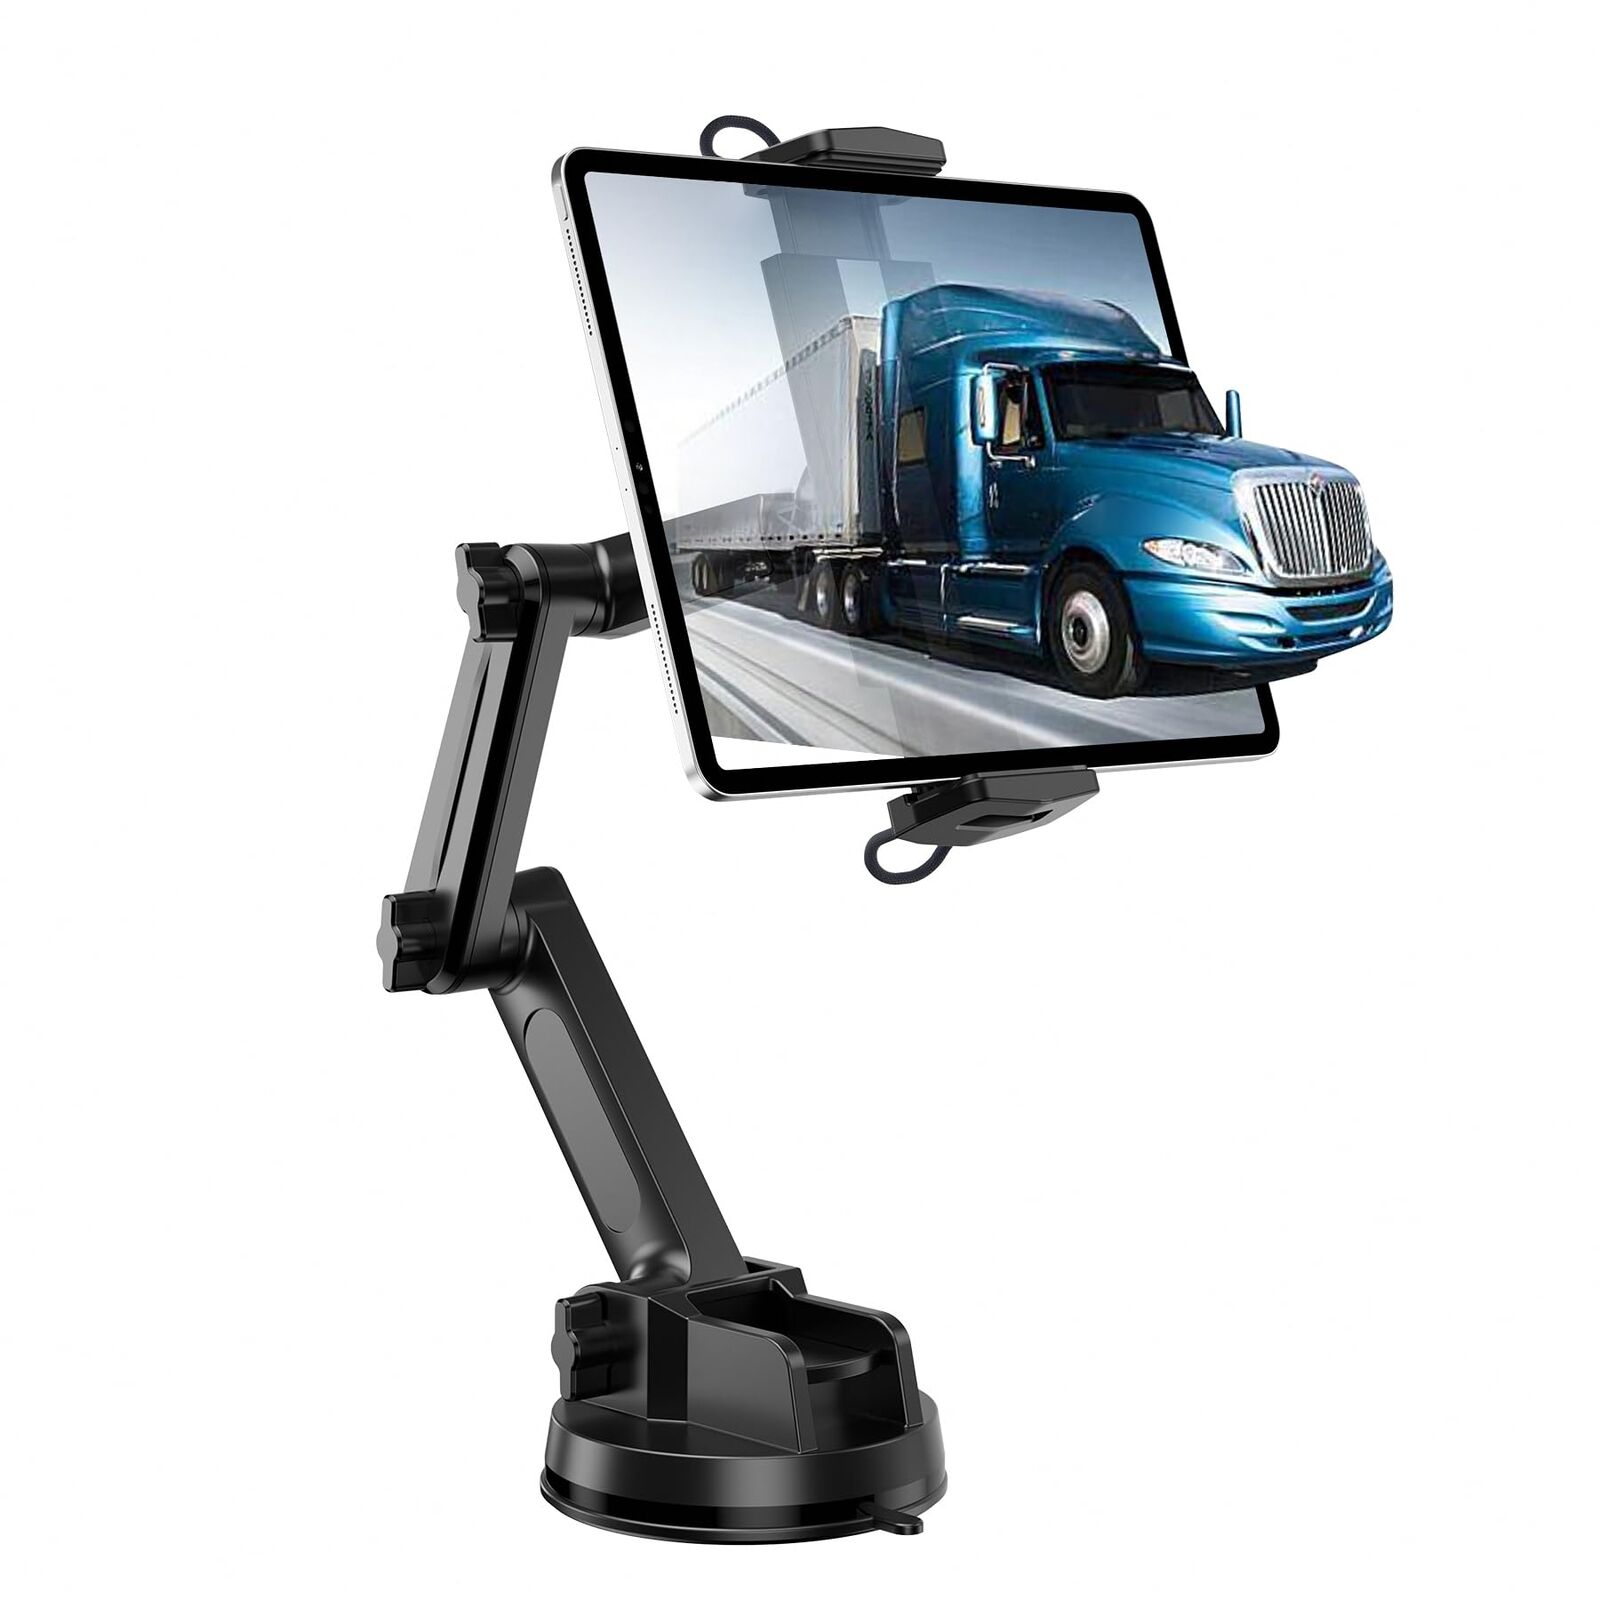 Tablet Mount for Truck-Heavy Duty [16 Inch Long Arm] Ipad Holder for Car Truck